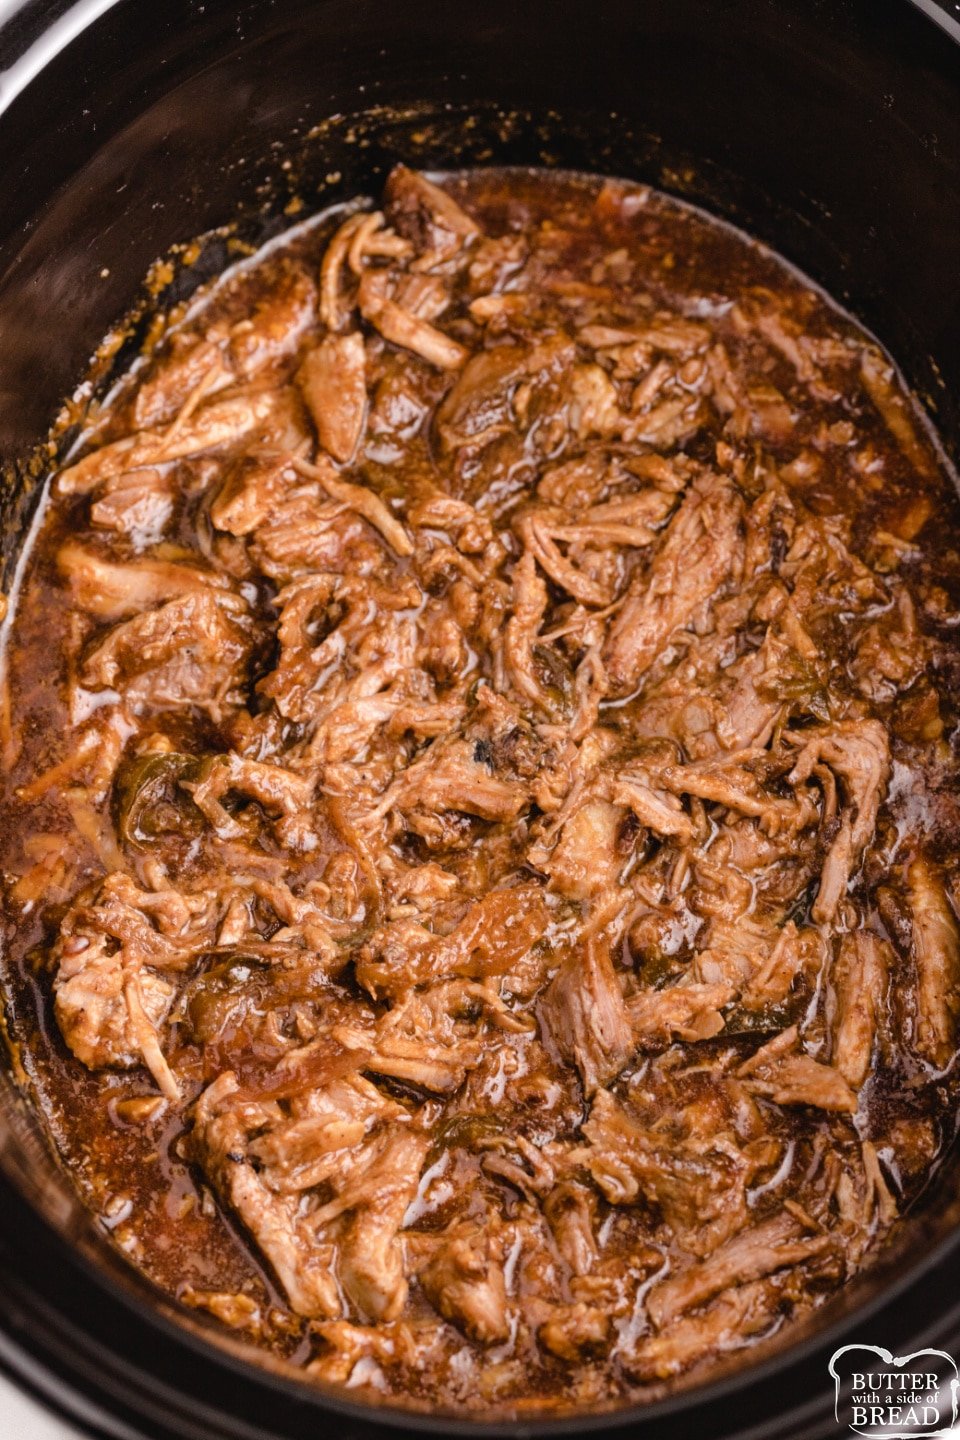 BBQ Pulled Pork recipe made in the crockpot